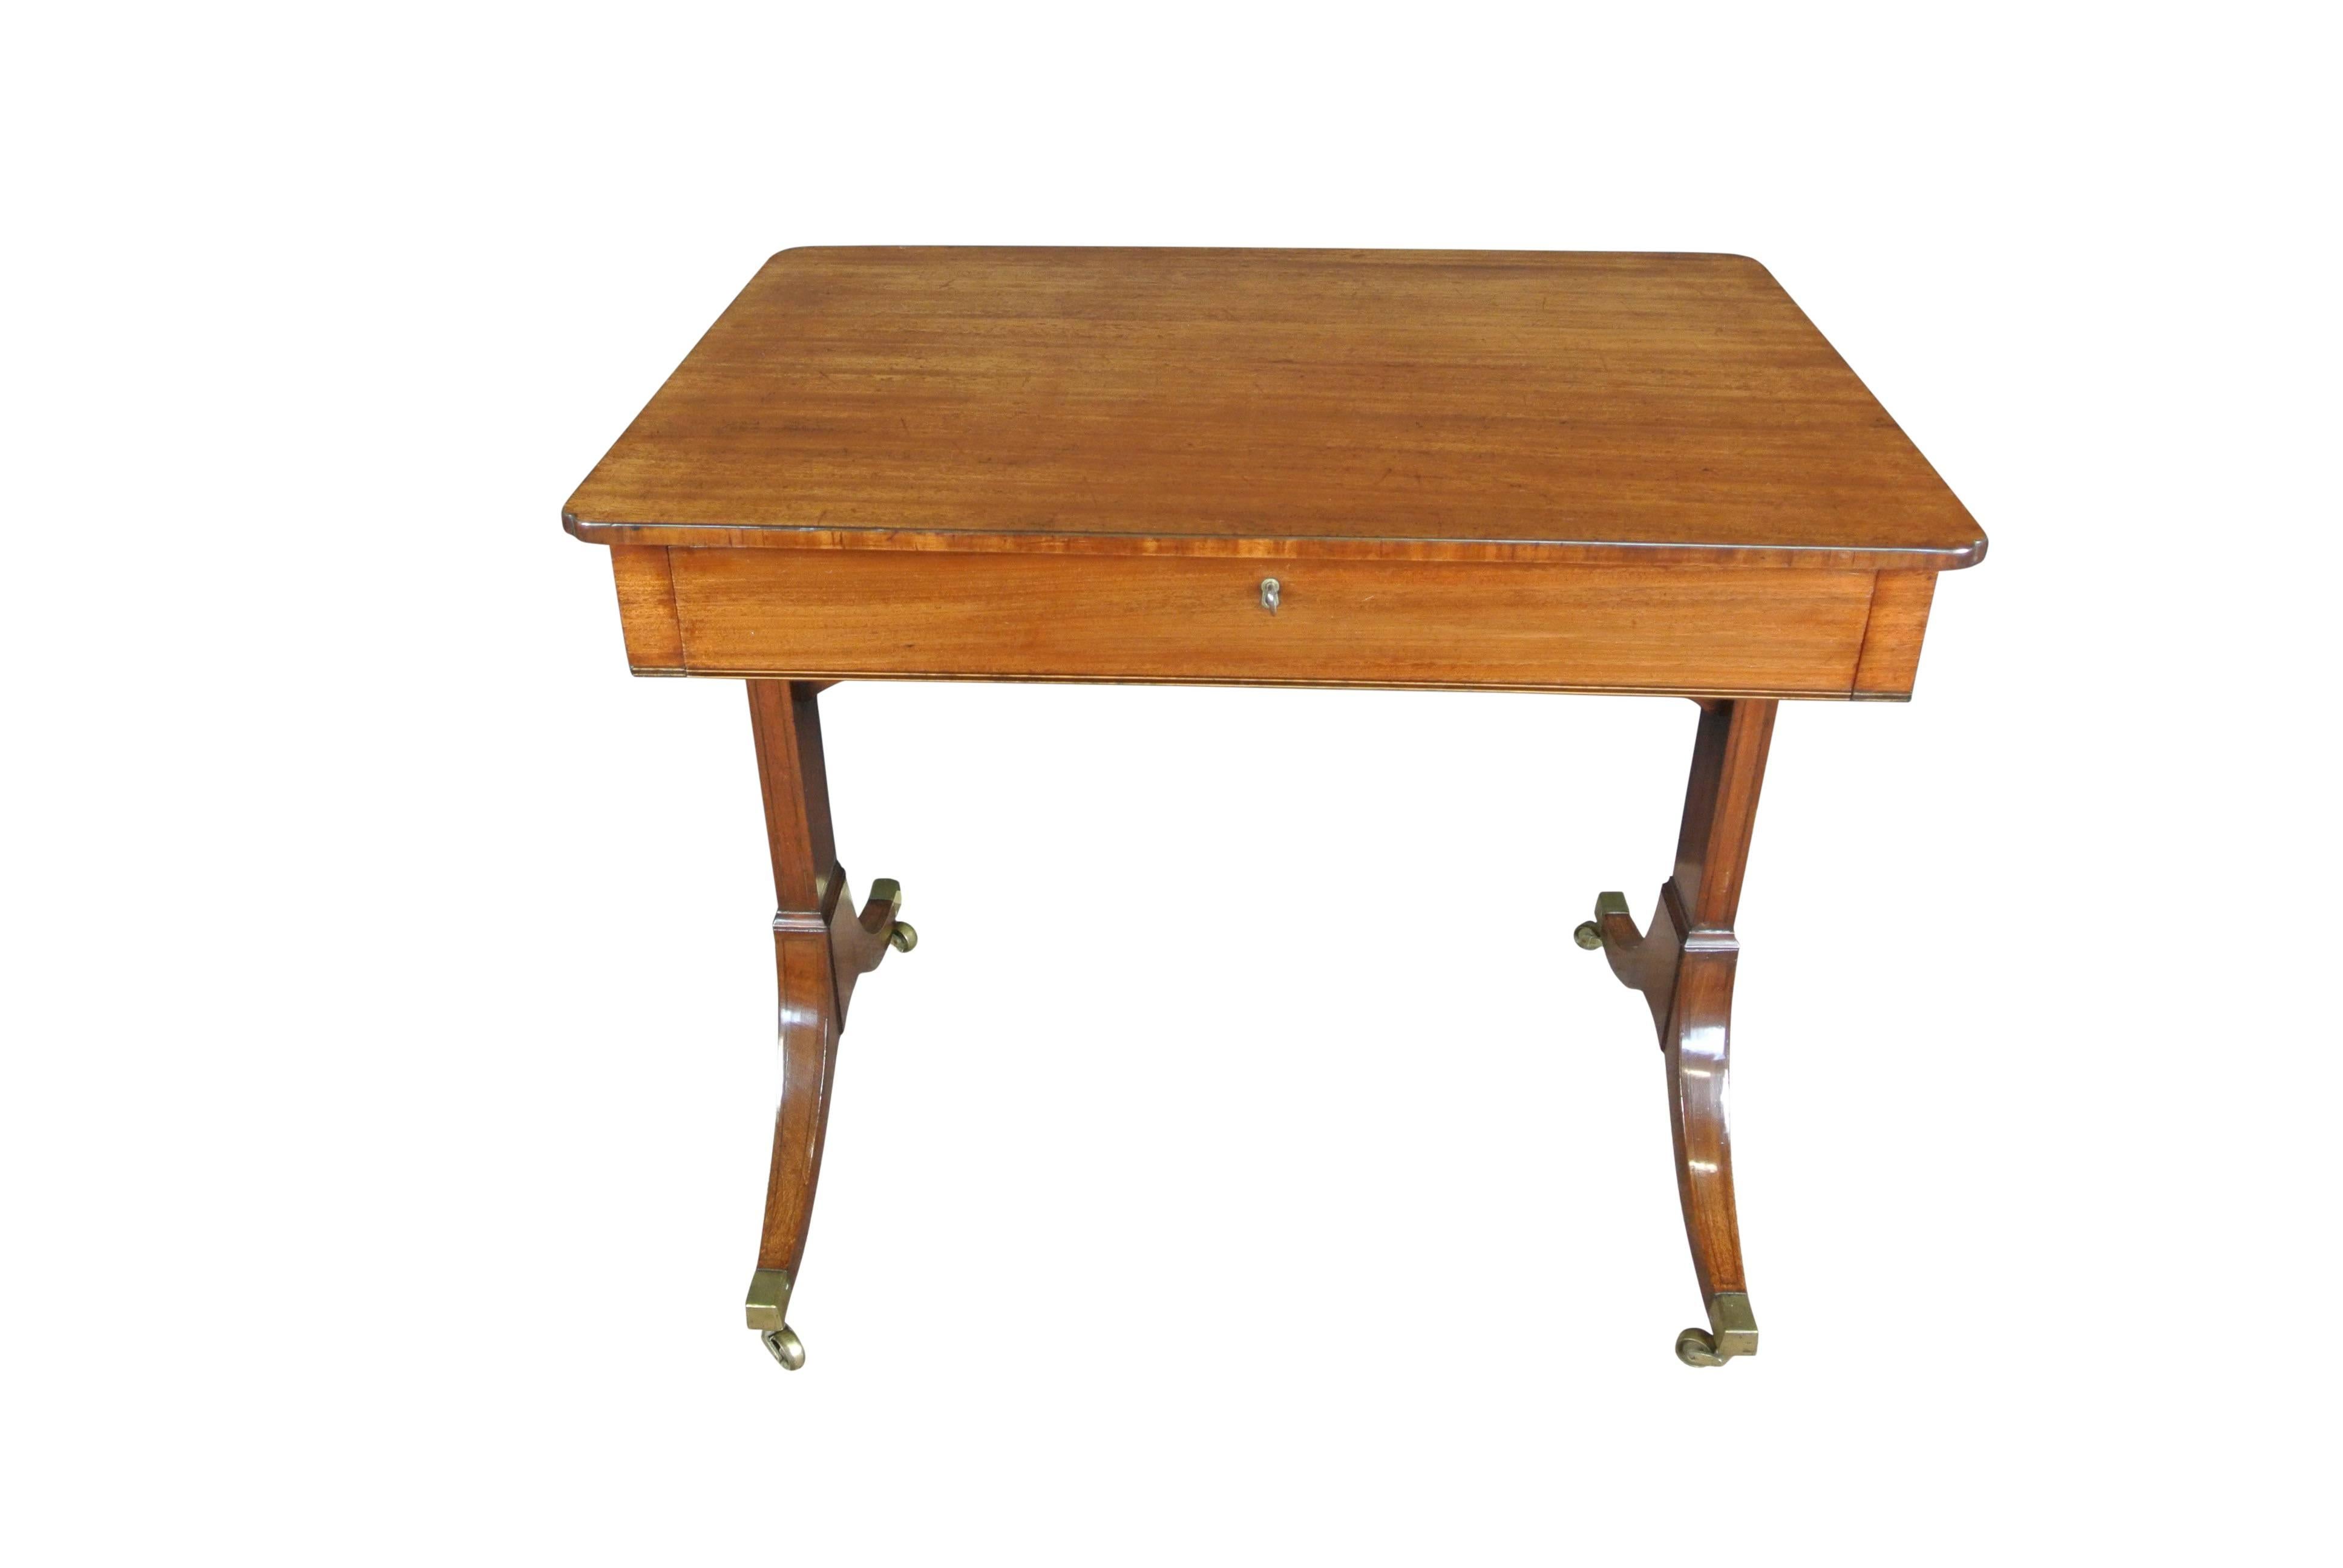 A fine Regency mahogany and inlaid ebony single drawer occasional table with Re-entrant corners and end supports on outswept feet ending in brass castors.